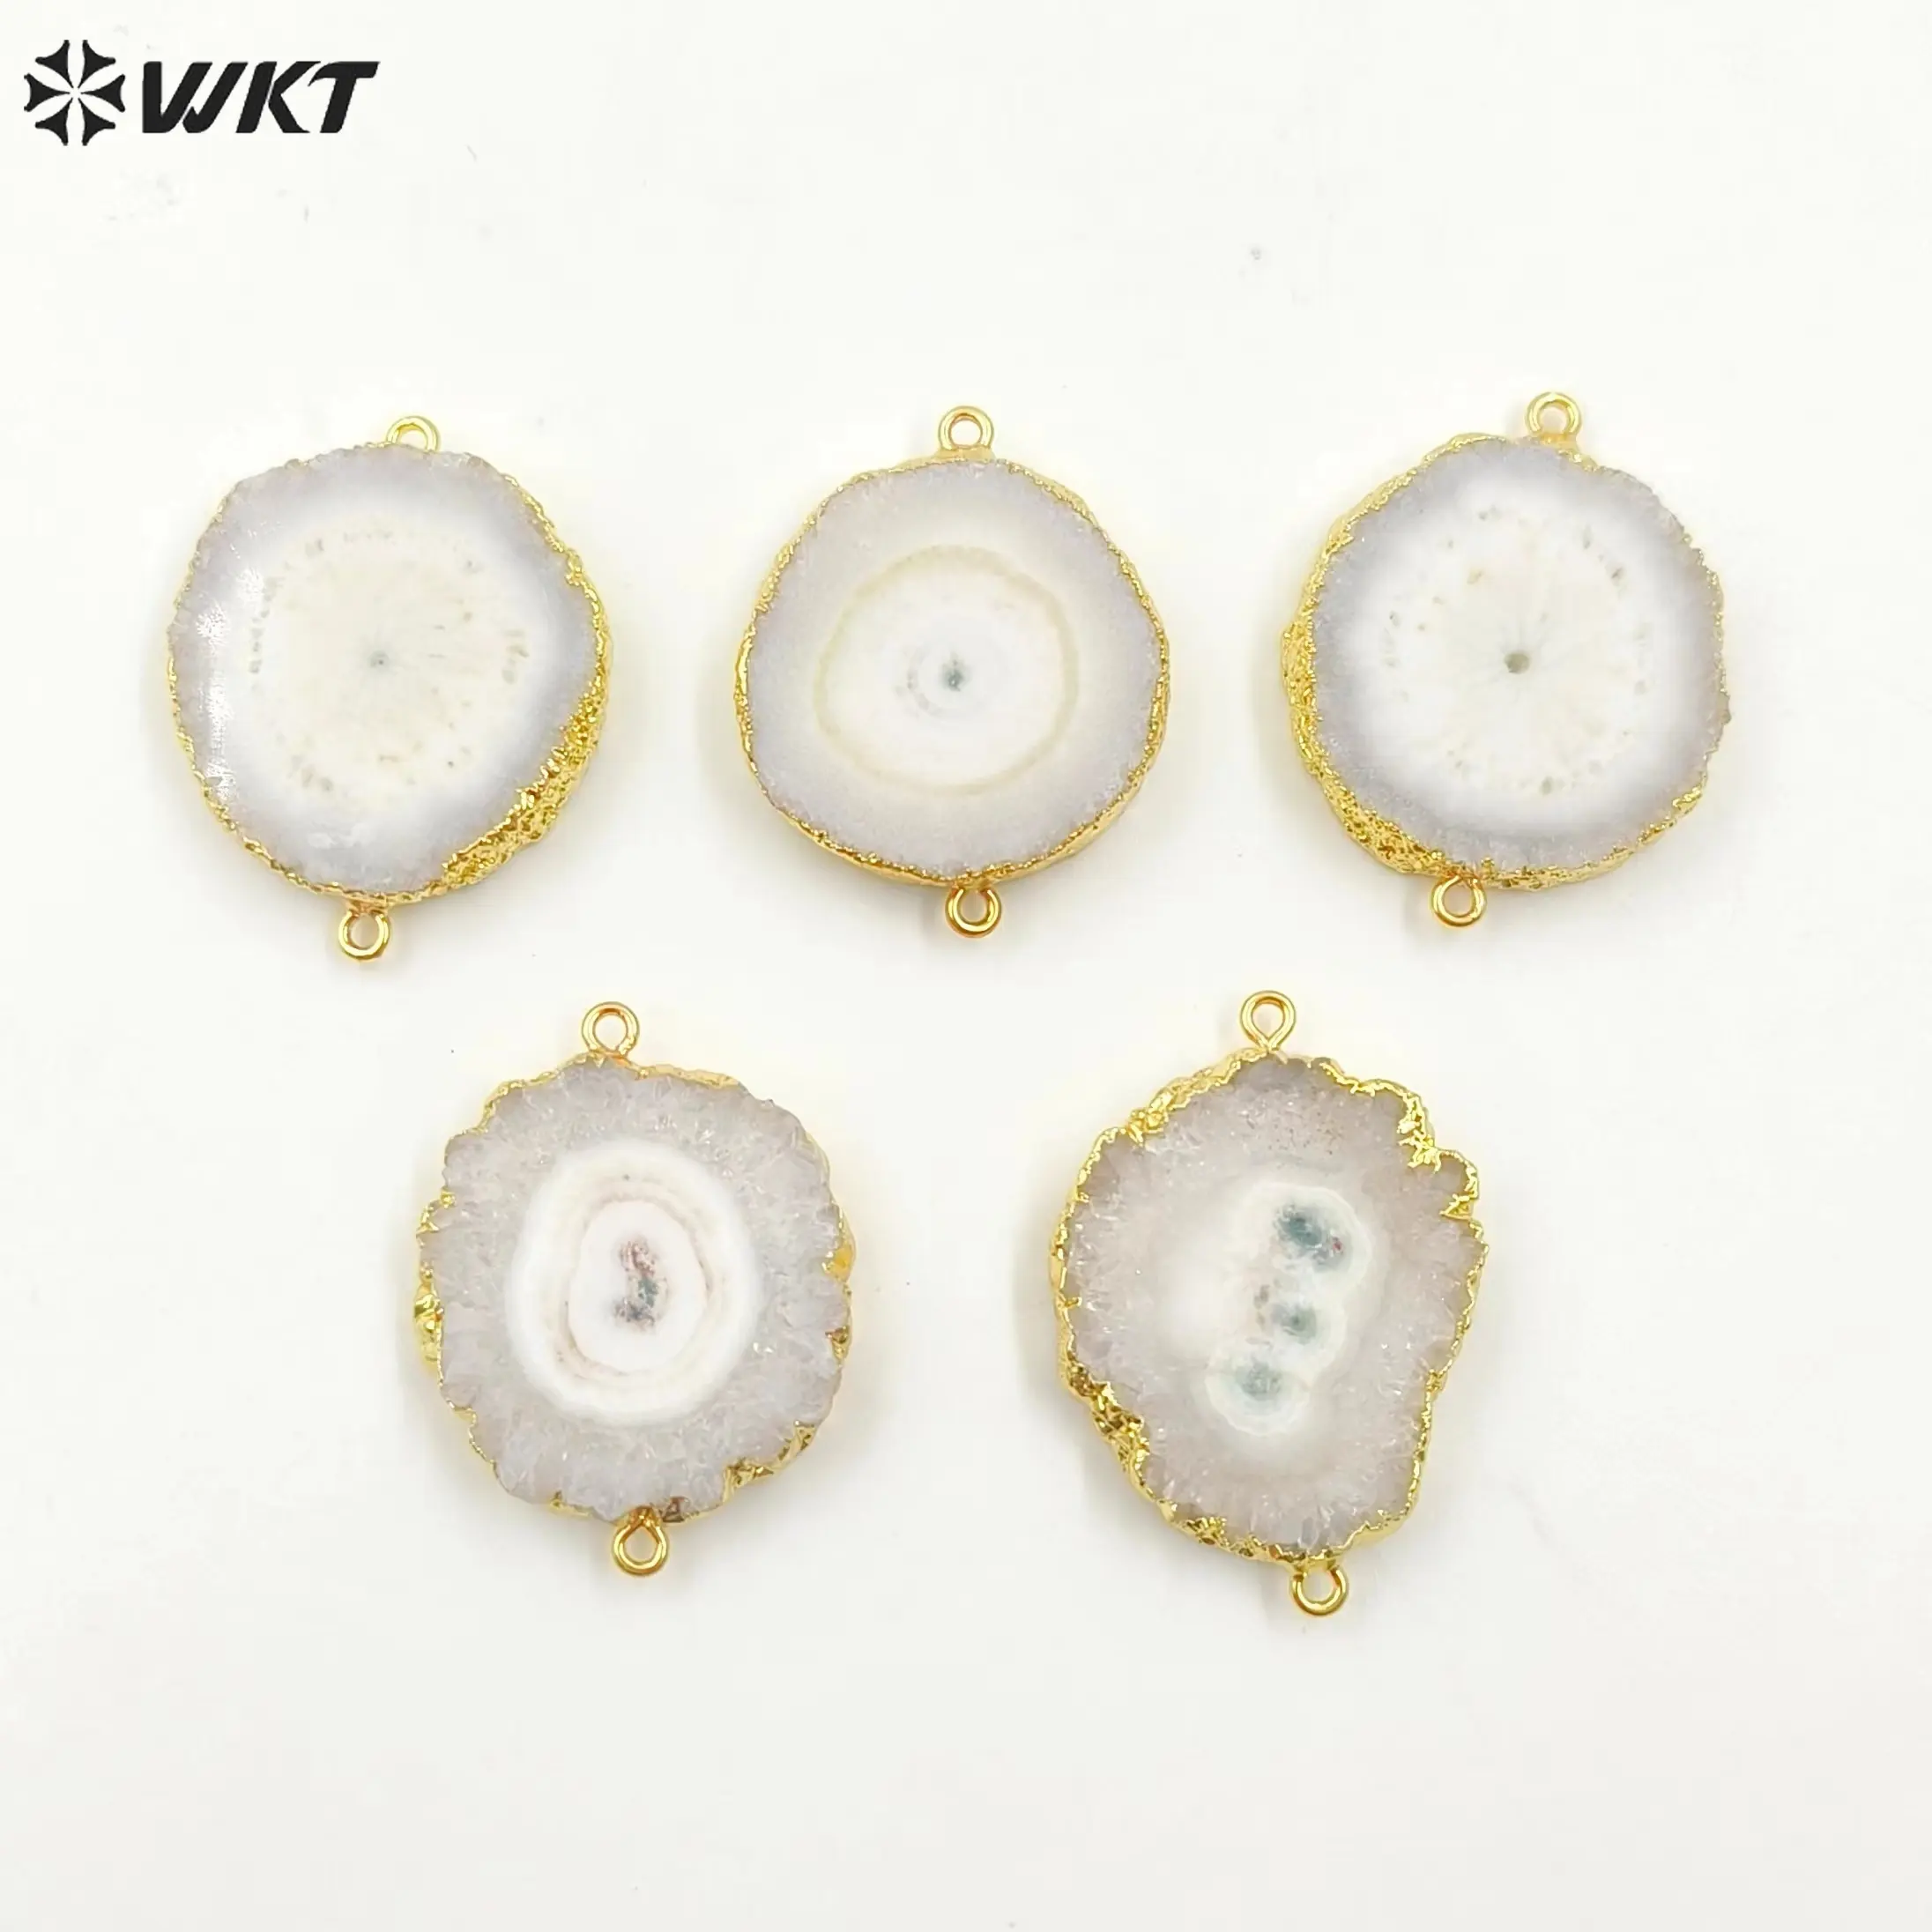 WT-C086 Wholesale Natural solar stalactite pendant 18k gold plated double loops white flower stone connectors for jewelry making